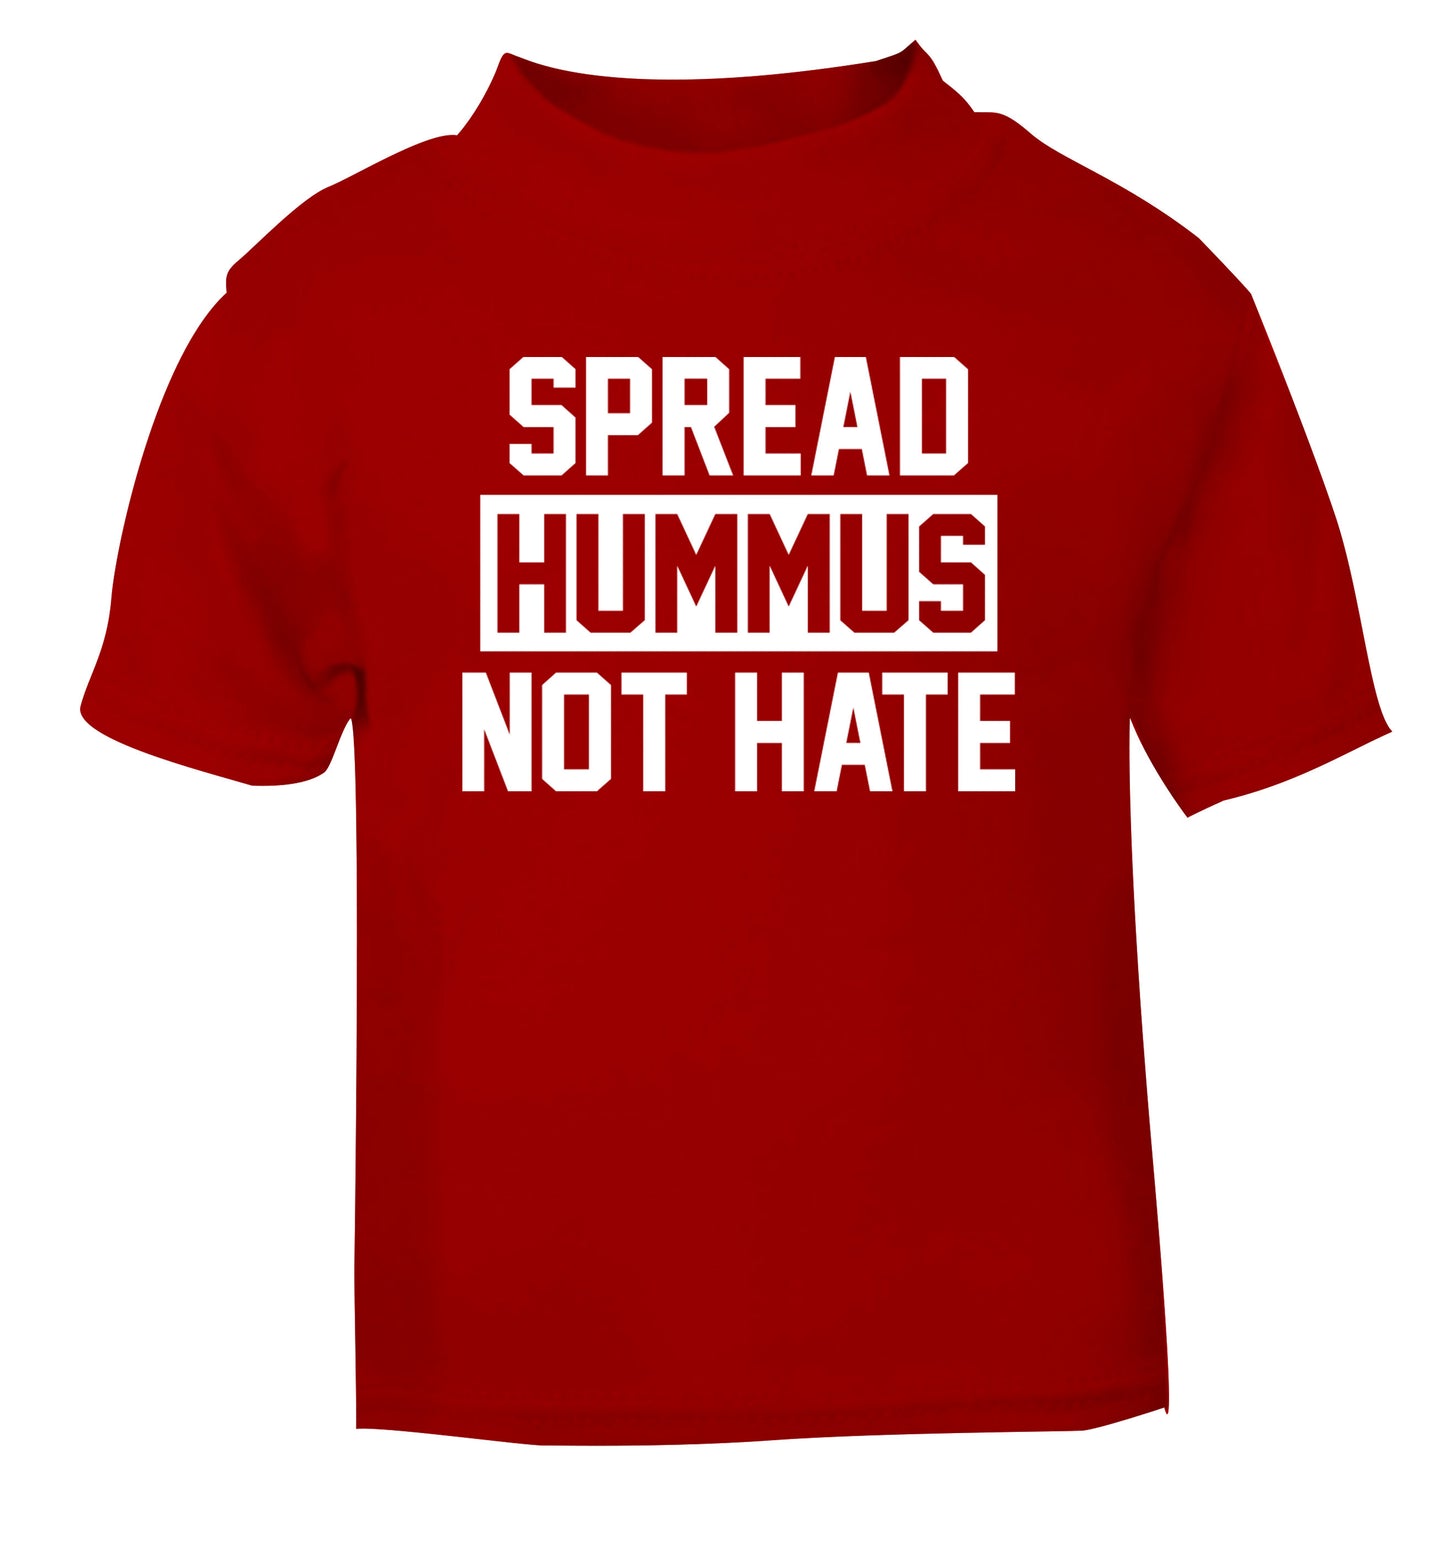 Spread hummus not hate red Baby Toddler Tshirt 2 Years